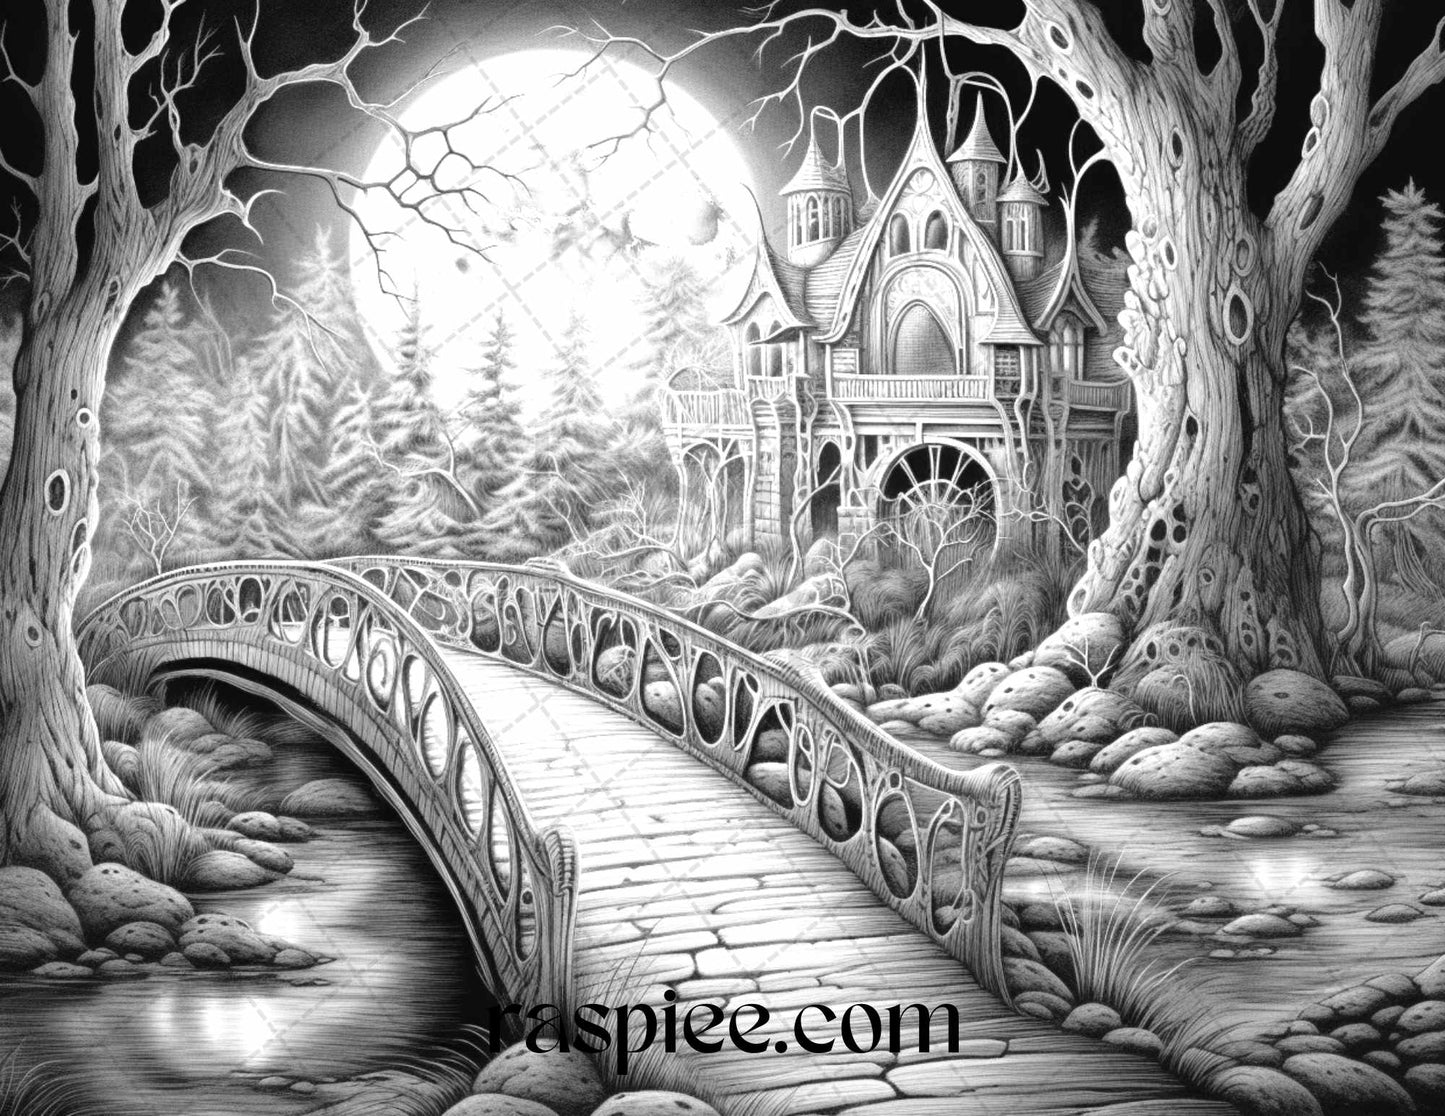 40 Halloween Landscapes Grayscale Coloring Pages Printable for Adults, PDF File Instant Download - Raspiee Coloring